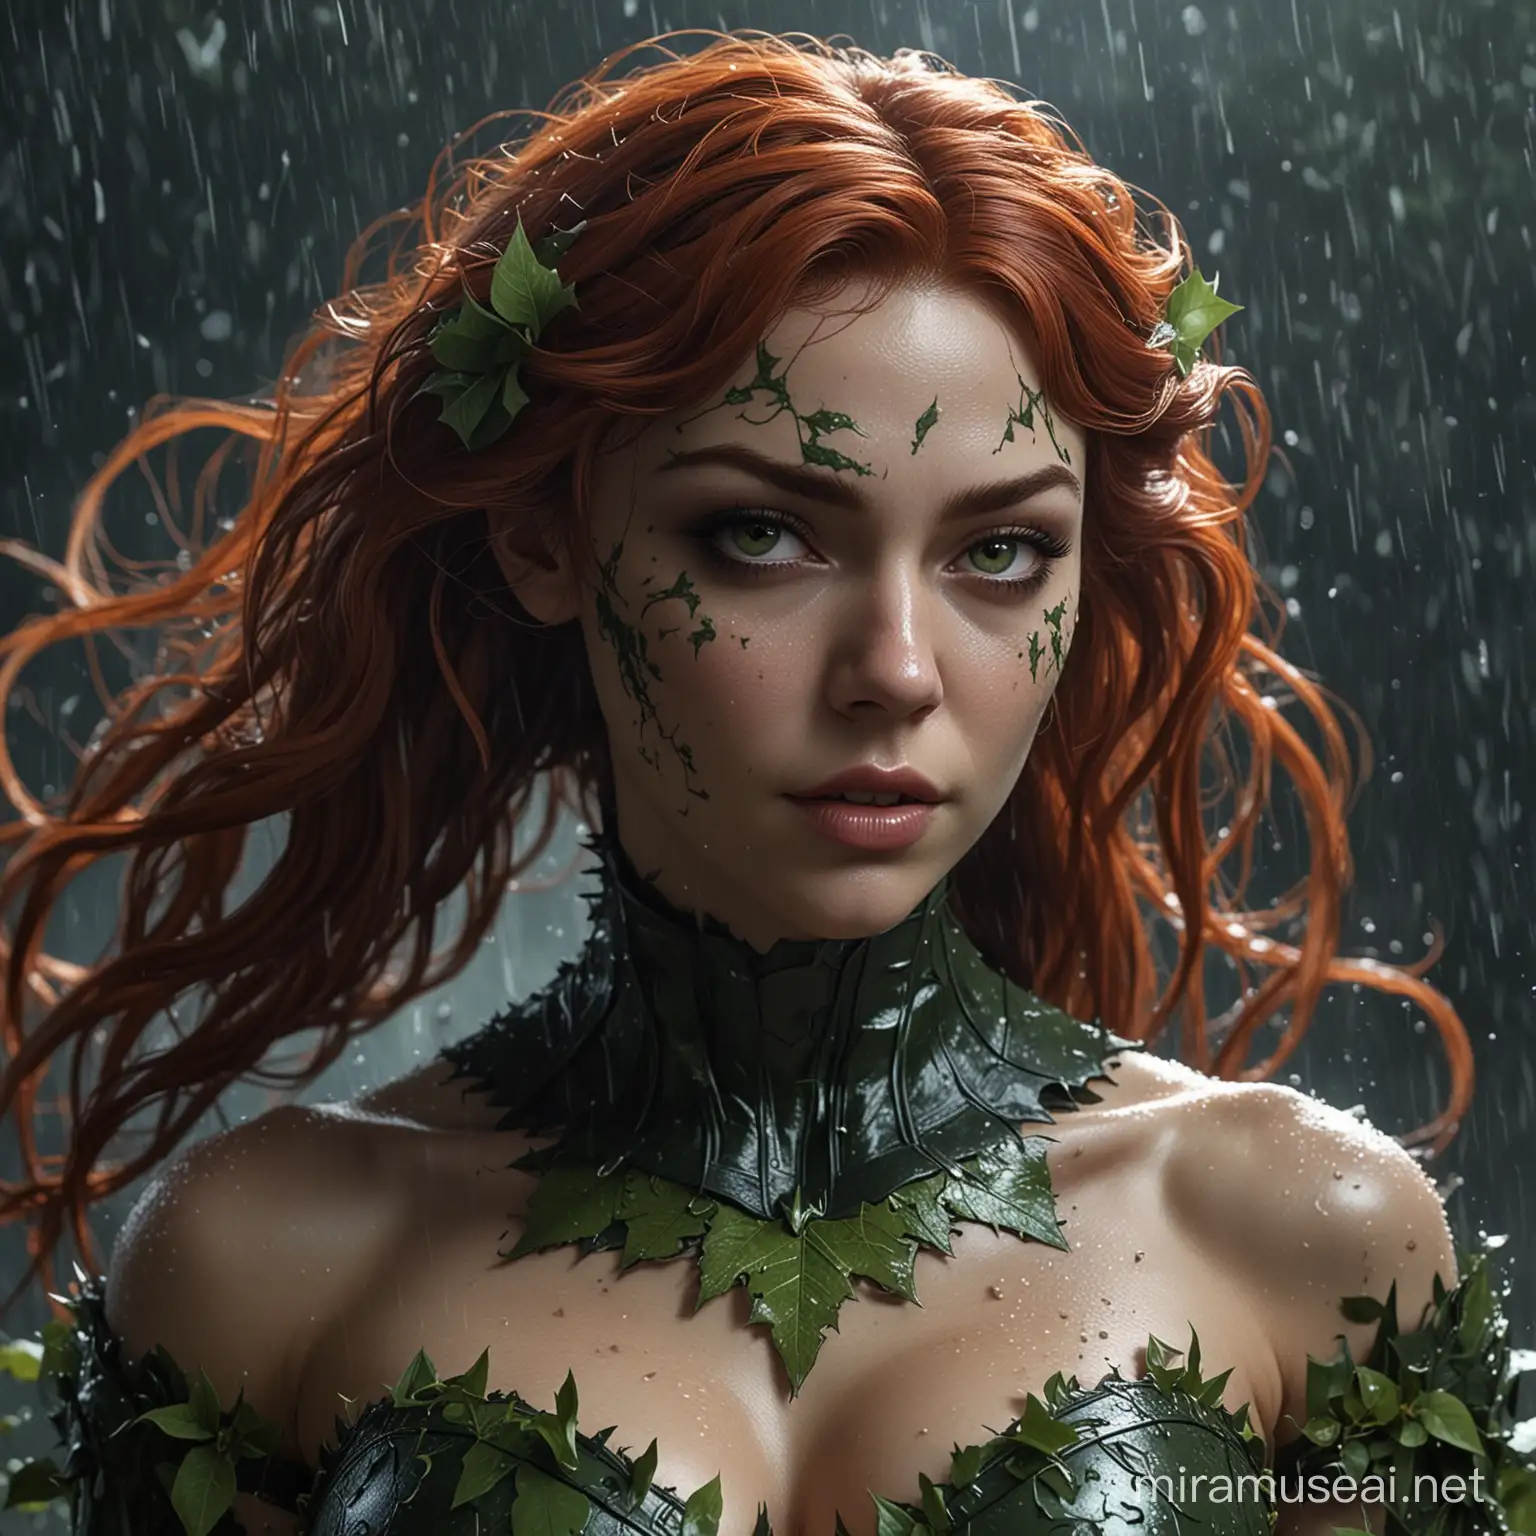 Epic Poison Ivy Battle in Stormy Night Intricate DnD Character Art